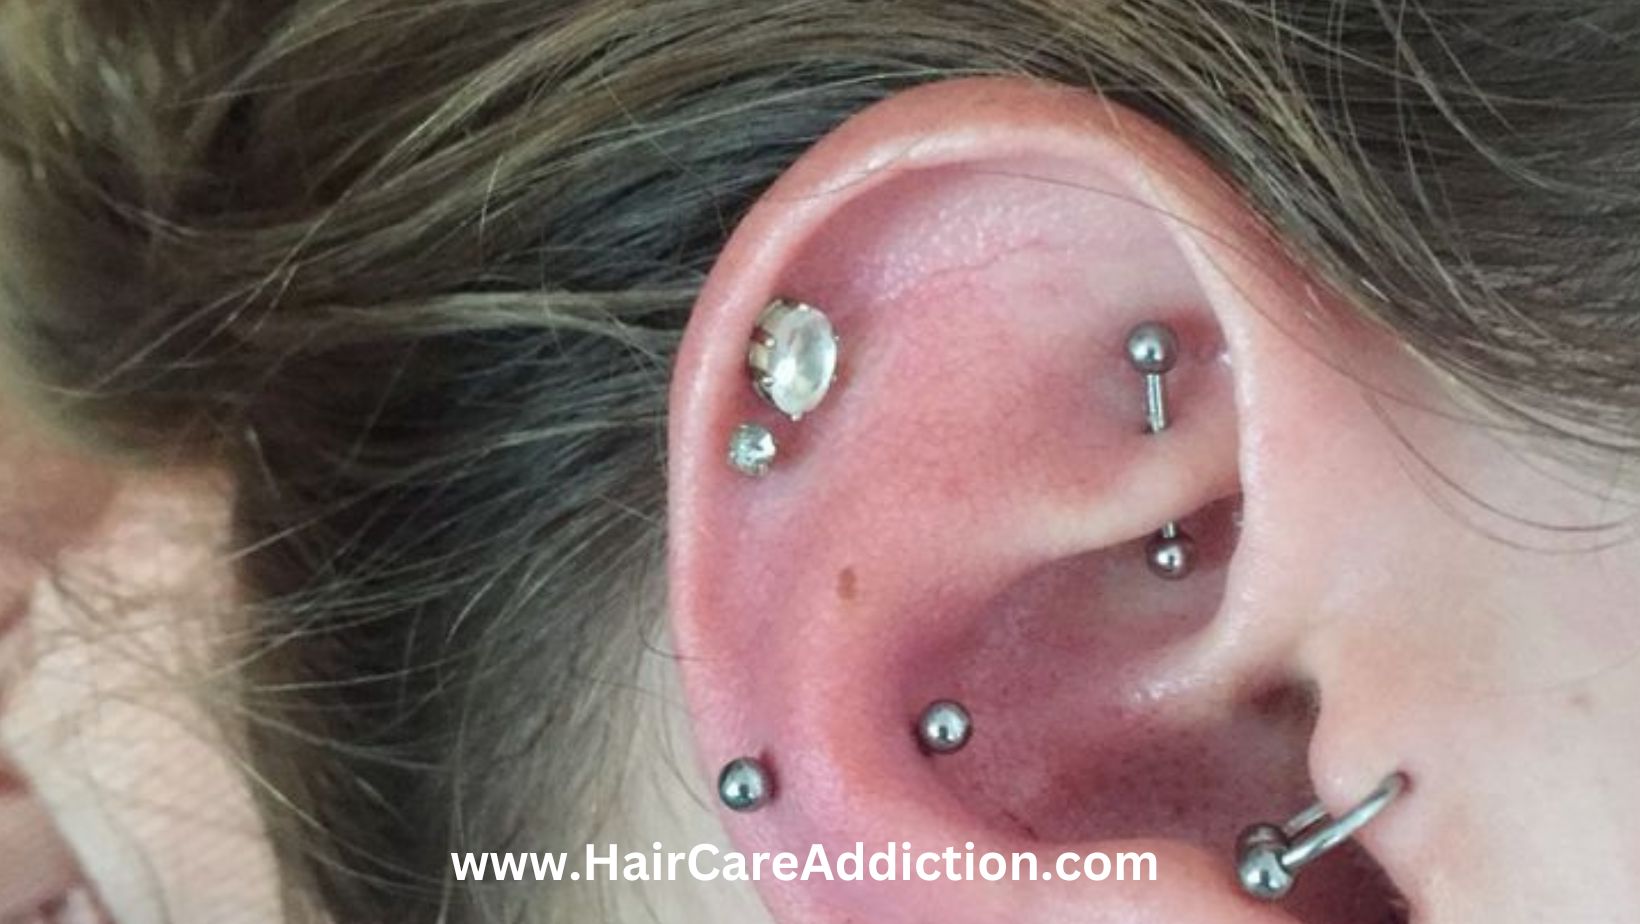 How to Stop Hair Getting Caught in Helix Piercing